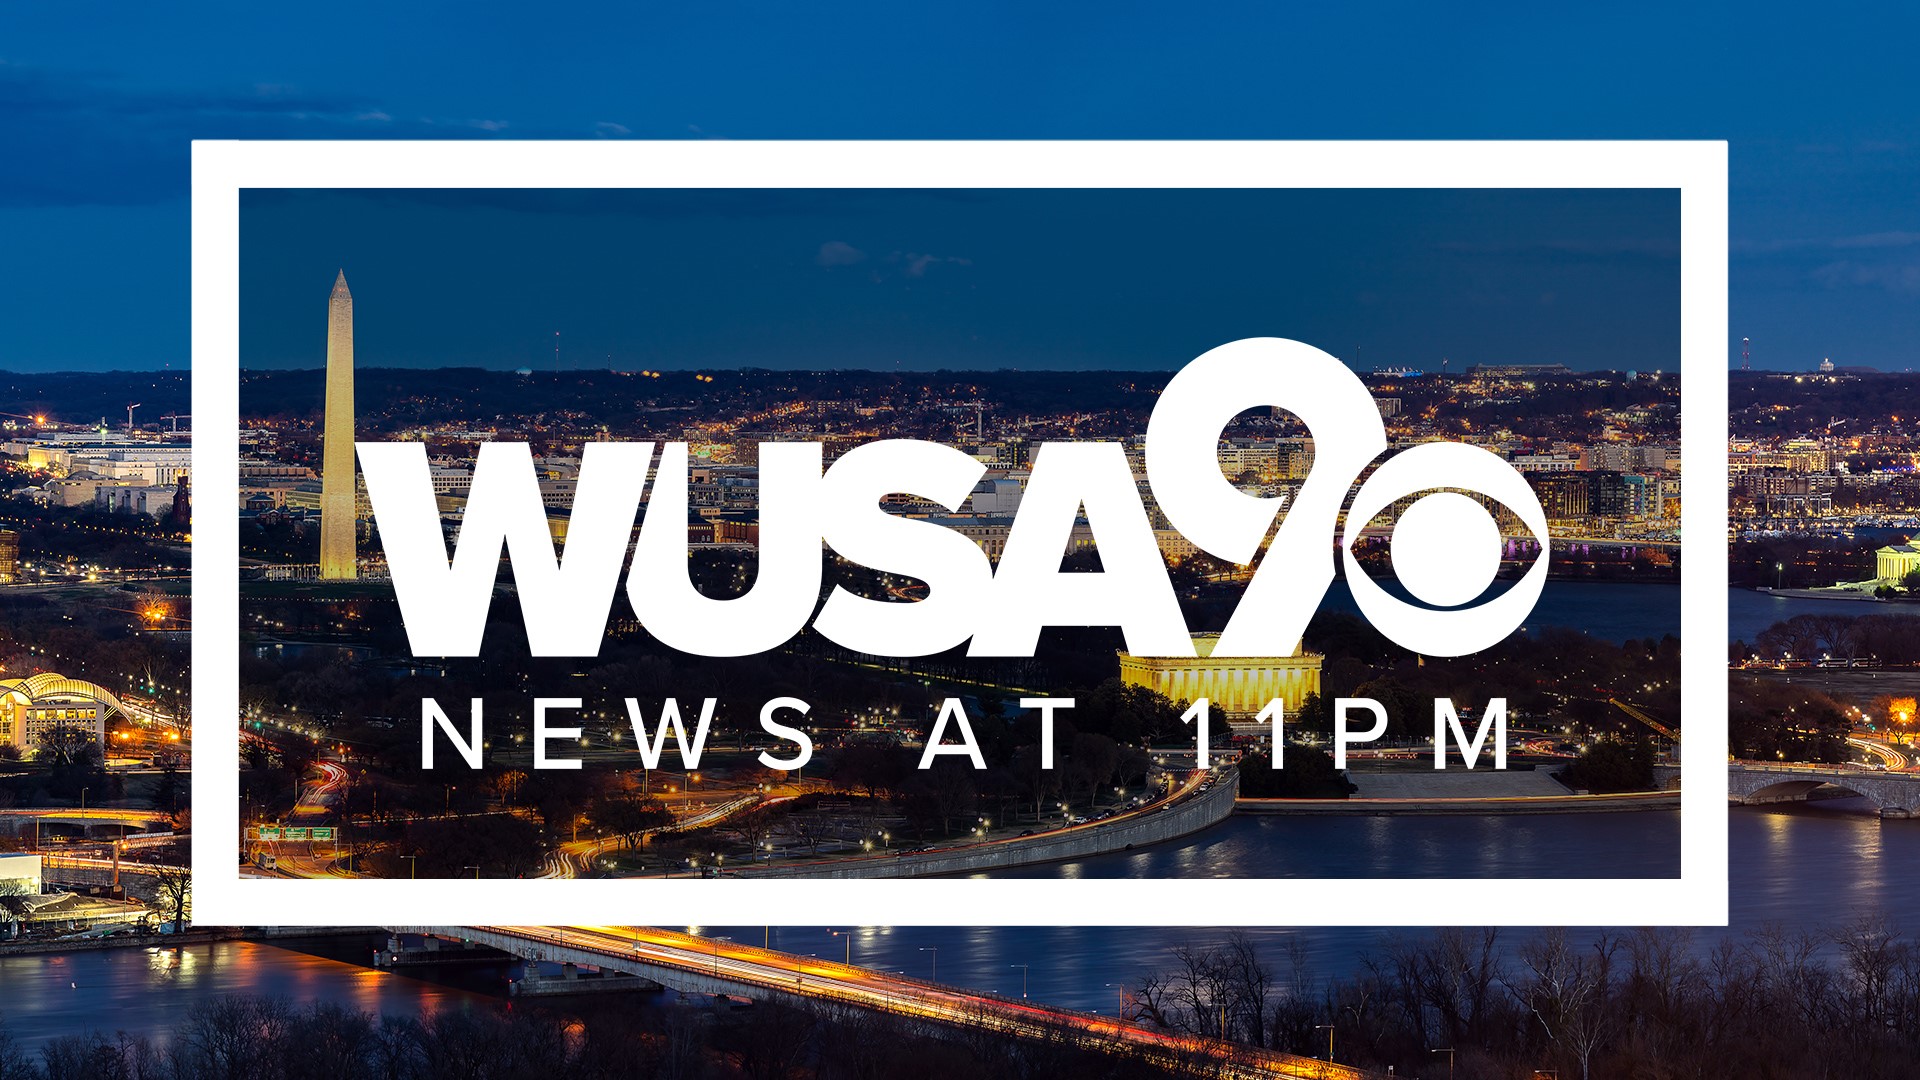 The WUSA 9 Weekend News Team covers local and national news, with local weather forecasts and developing stories affecting the Washington, D.C., area.